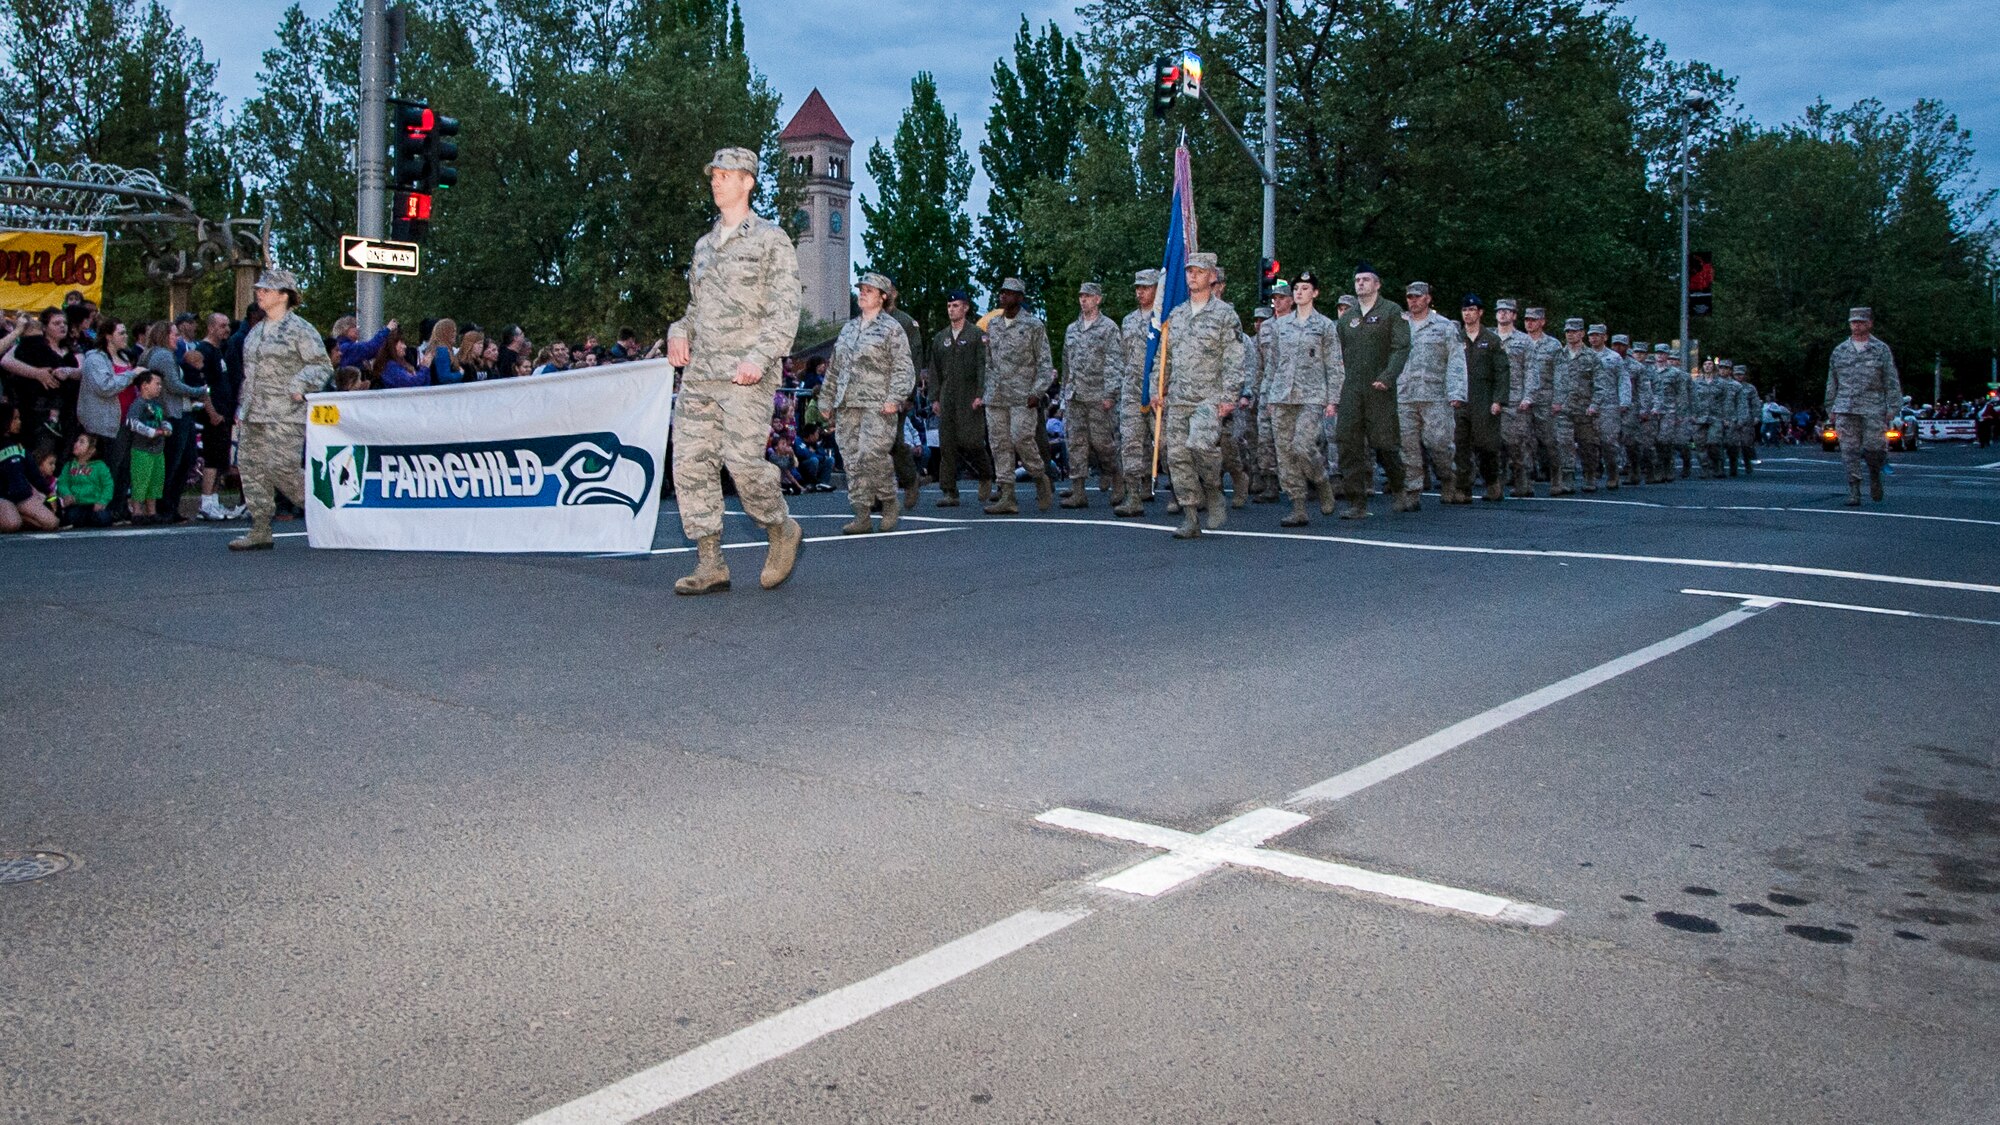 Airmen from Fairchild Air Force Base, Wash., march in formation during the 75th Annual Lilac Festival Armed Forced Torchlight Parade in Spokane, Wash., May 17, 2014. The parade is the largest armed forces torchlight parade in the nation and is made to honor service members of both the past and present. (U.S. Air Force photo by Staff Sgt. Benjamin W. Stratton/Released)